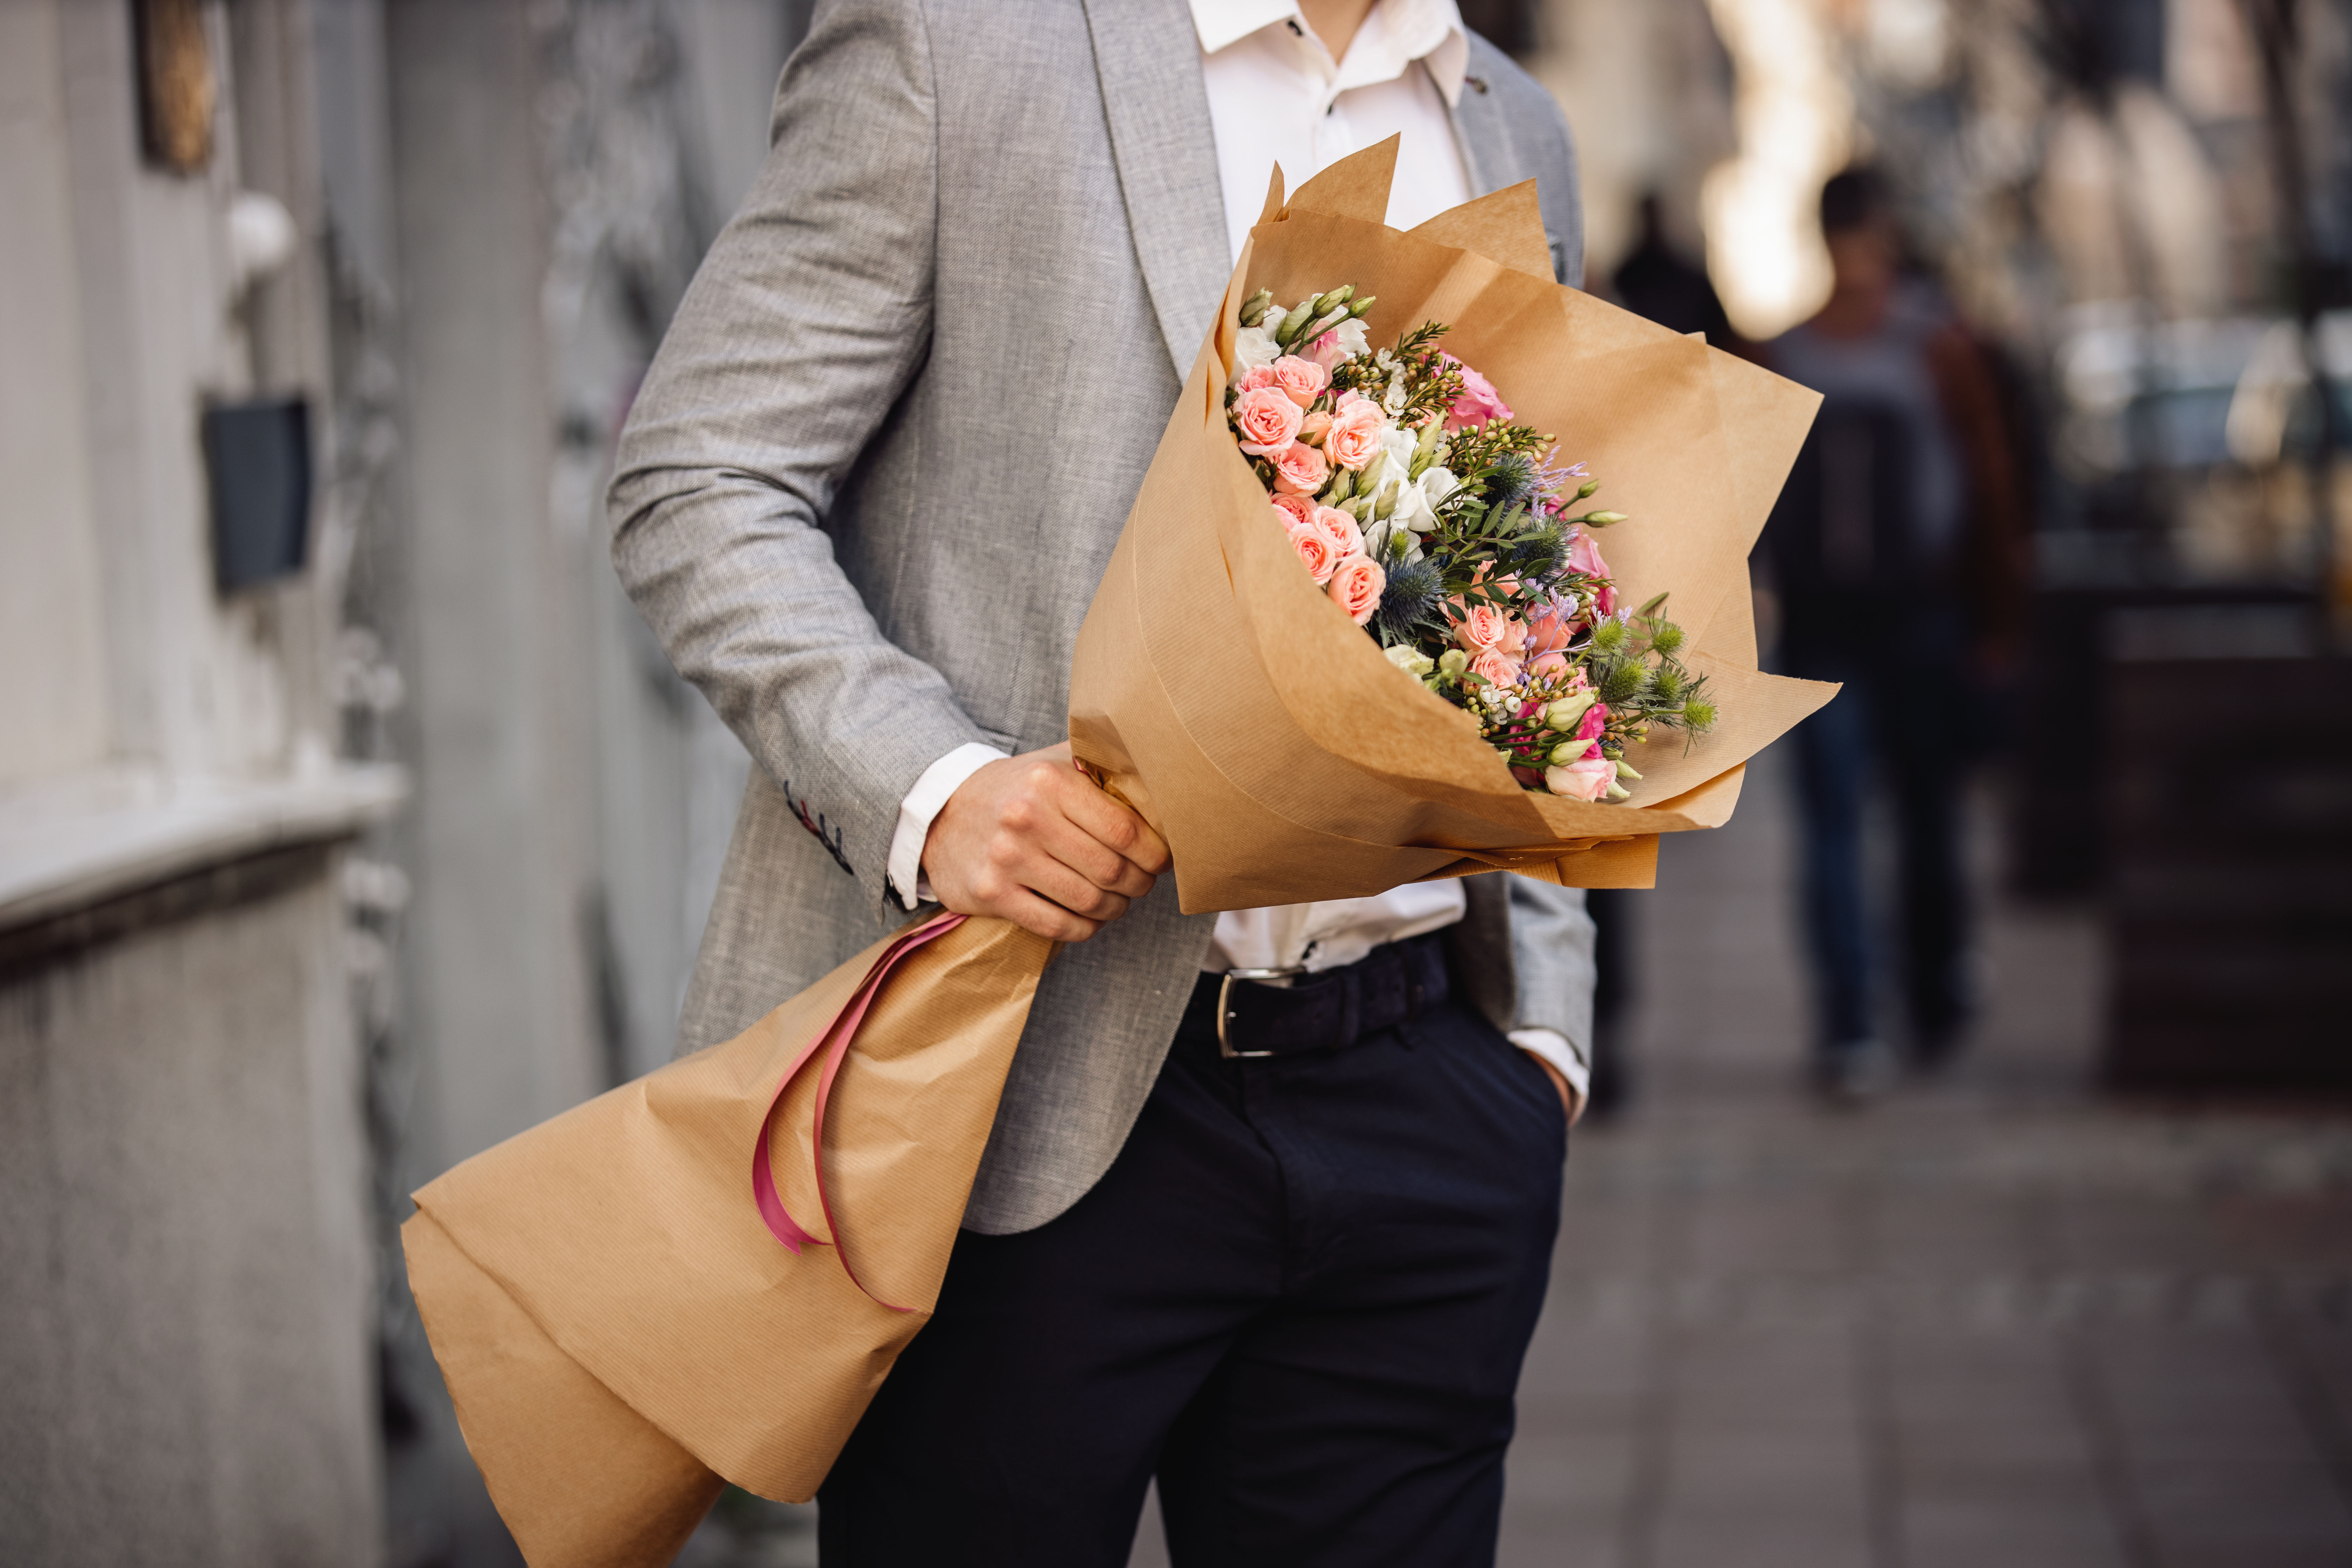 Young Man Holding Beautiful Bouquet Of Fresh Flowers | Source: Getty Images